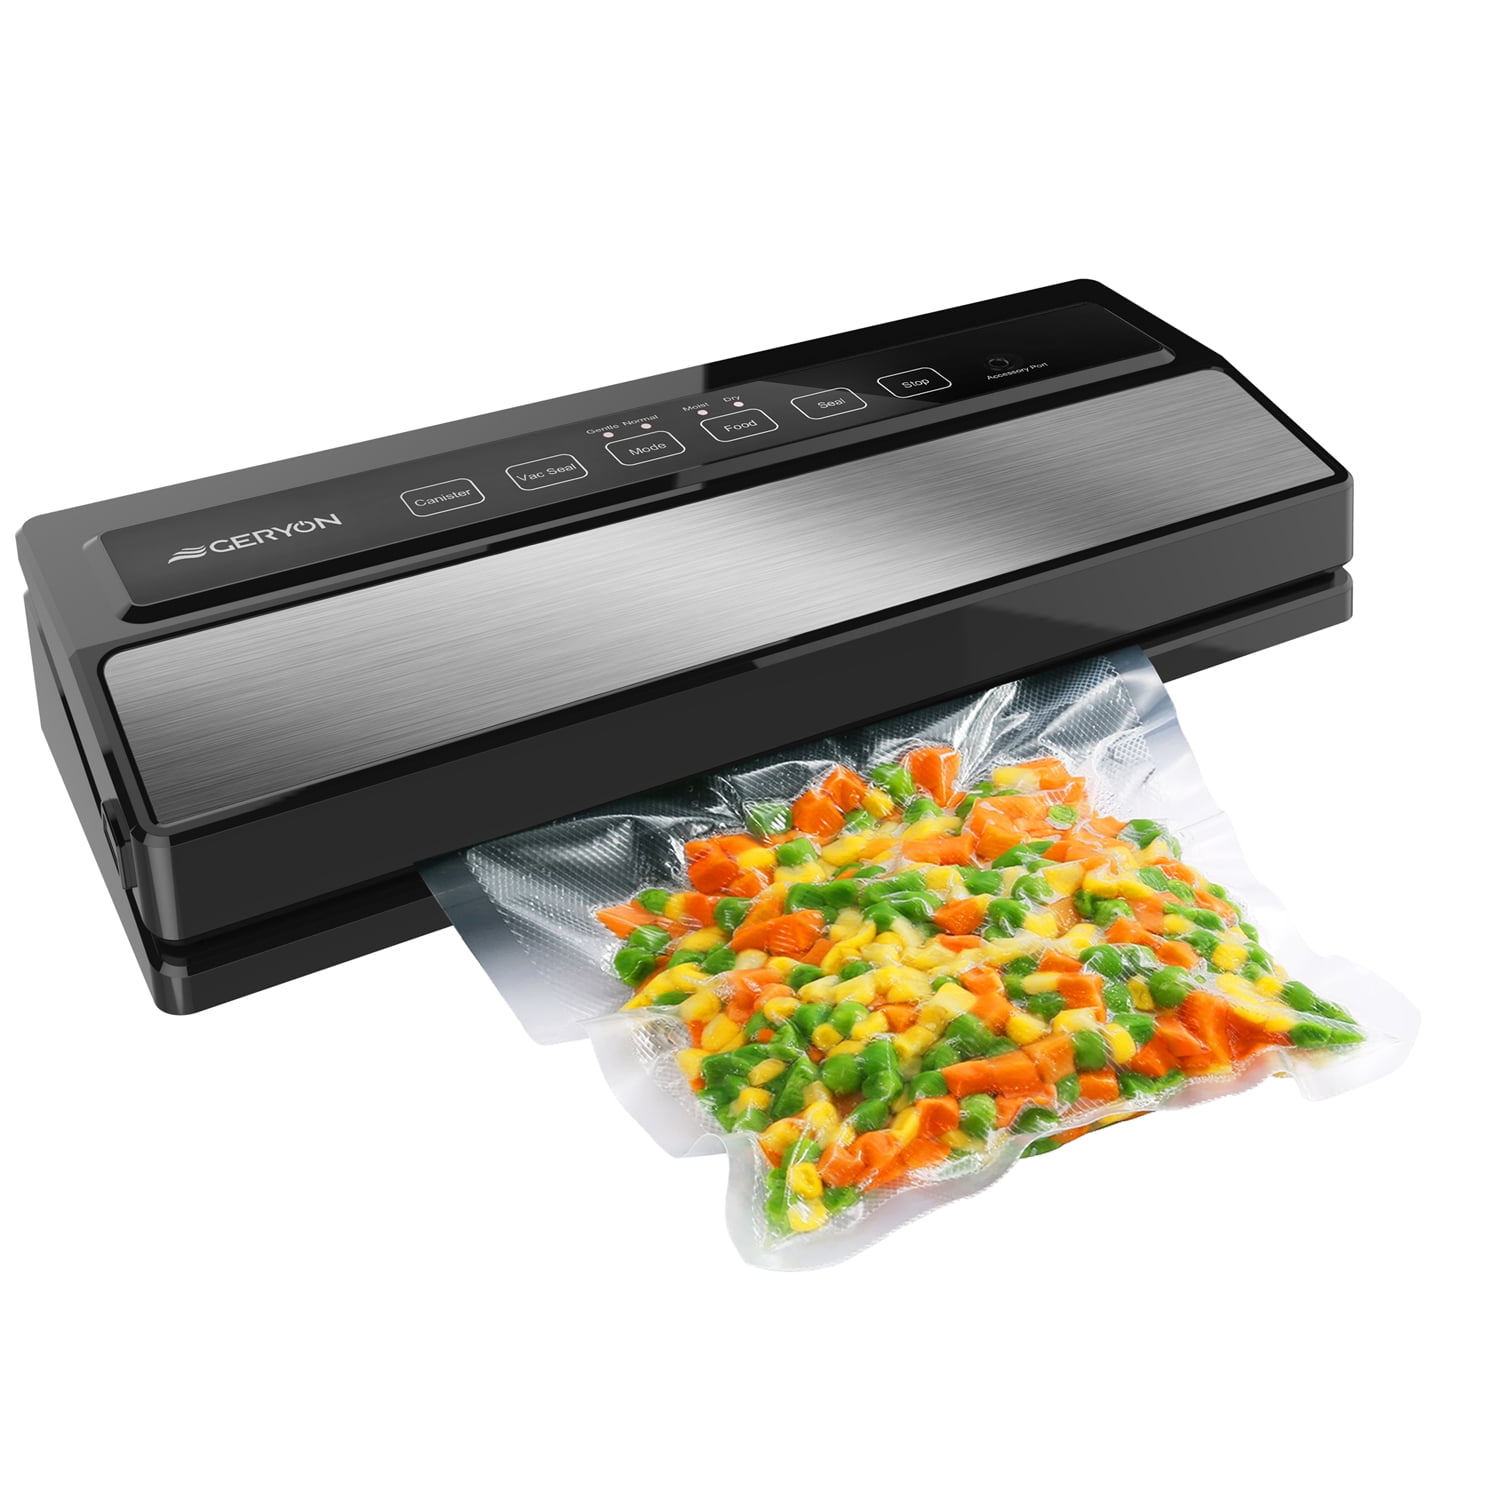 Geryon Vacuum Sealer: My Review After 6 Months - Home Sweet Table -  Healthy, fresh, and simple family-friendly recipes